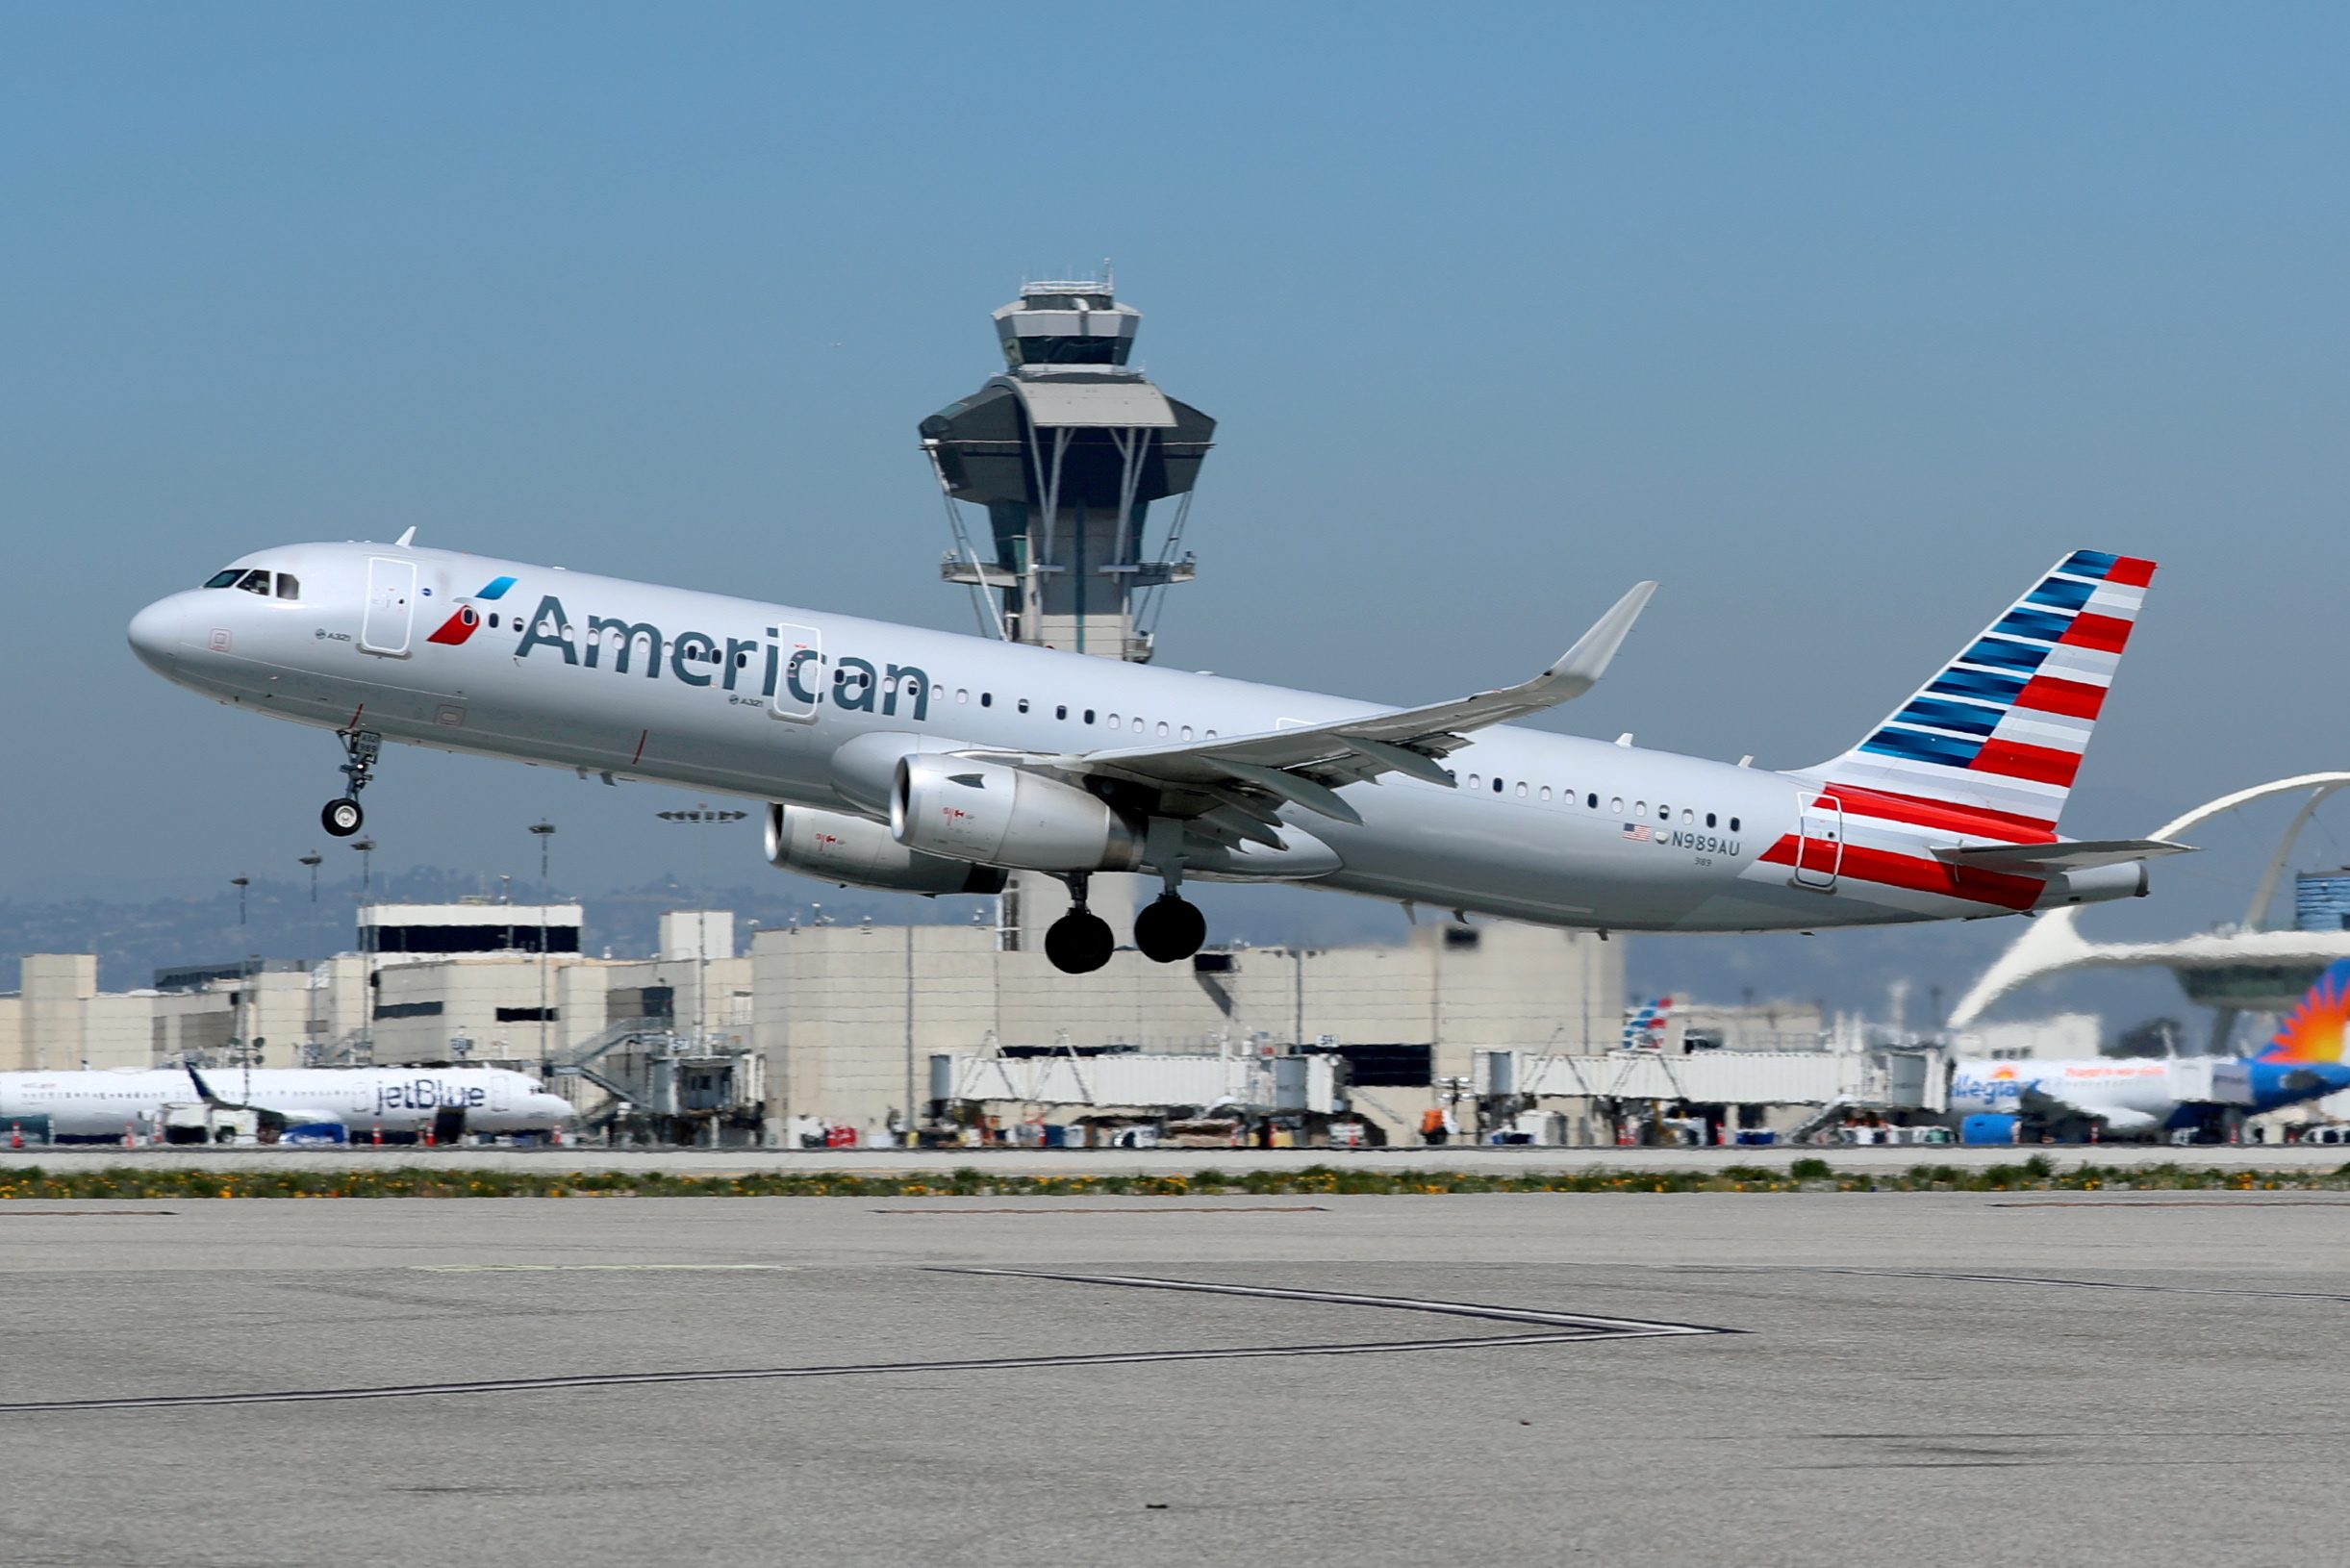 American Airlines bets on nonstop travel demand as it relaunches India flights